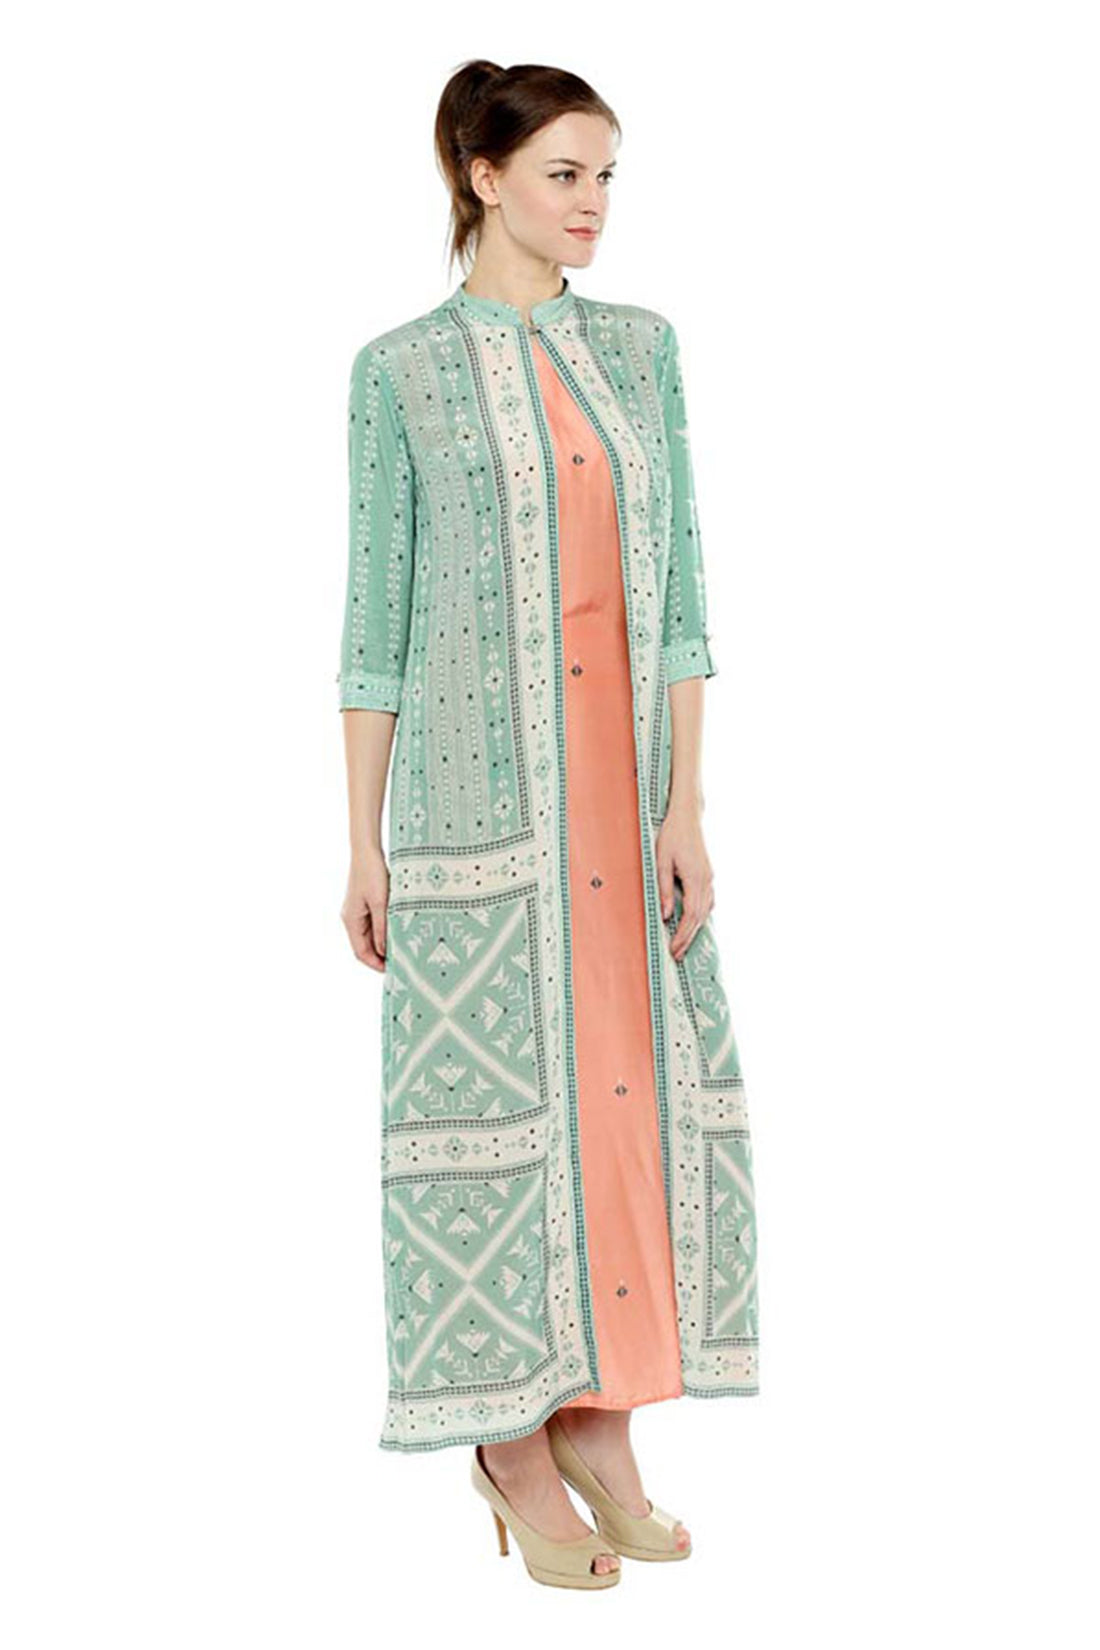 Azulejos Printed Long Dress With Jacket